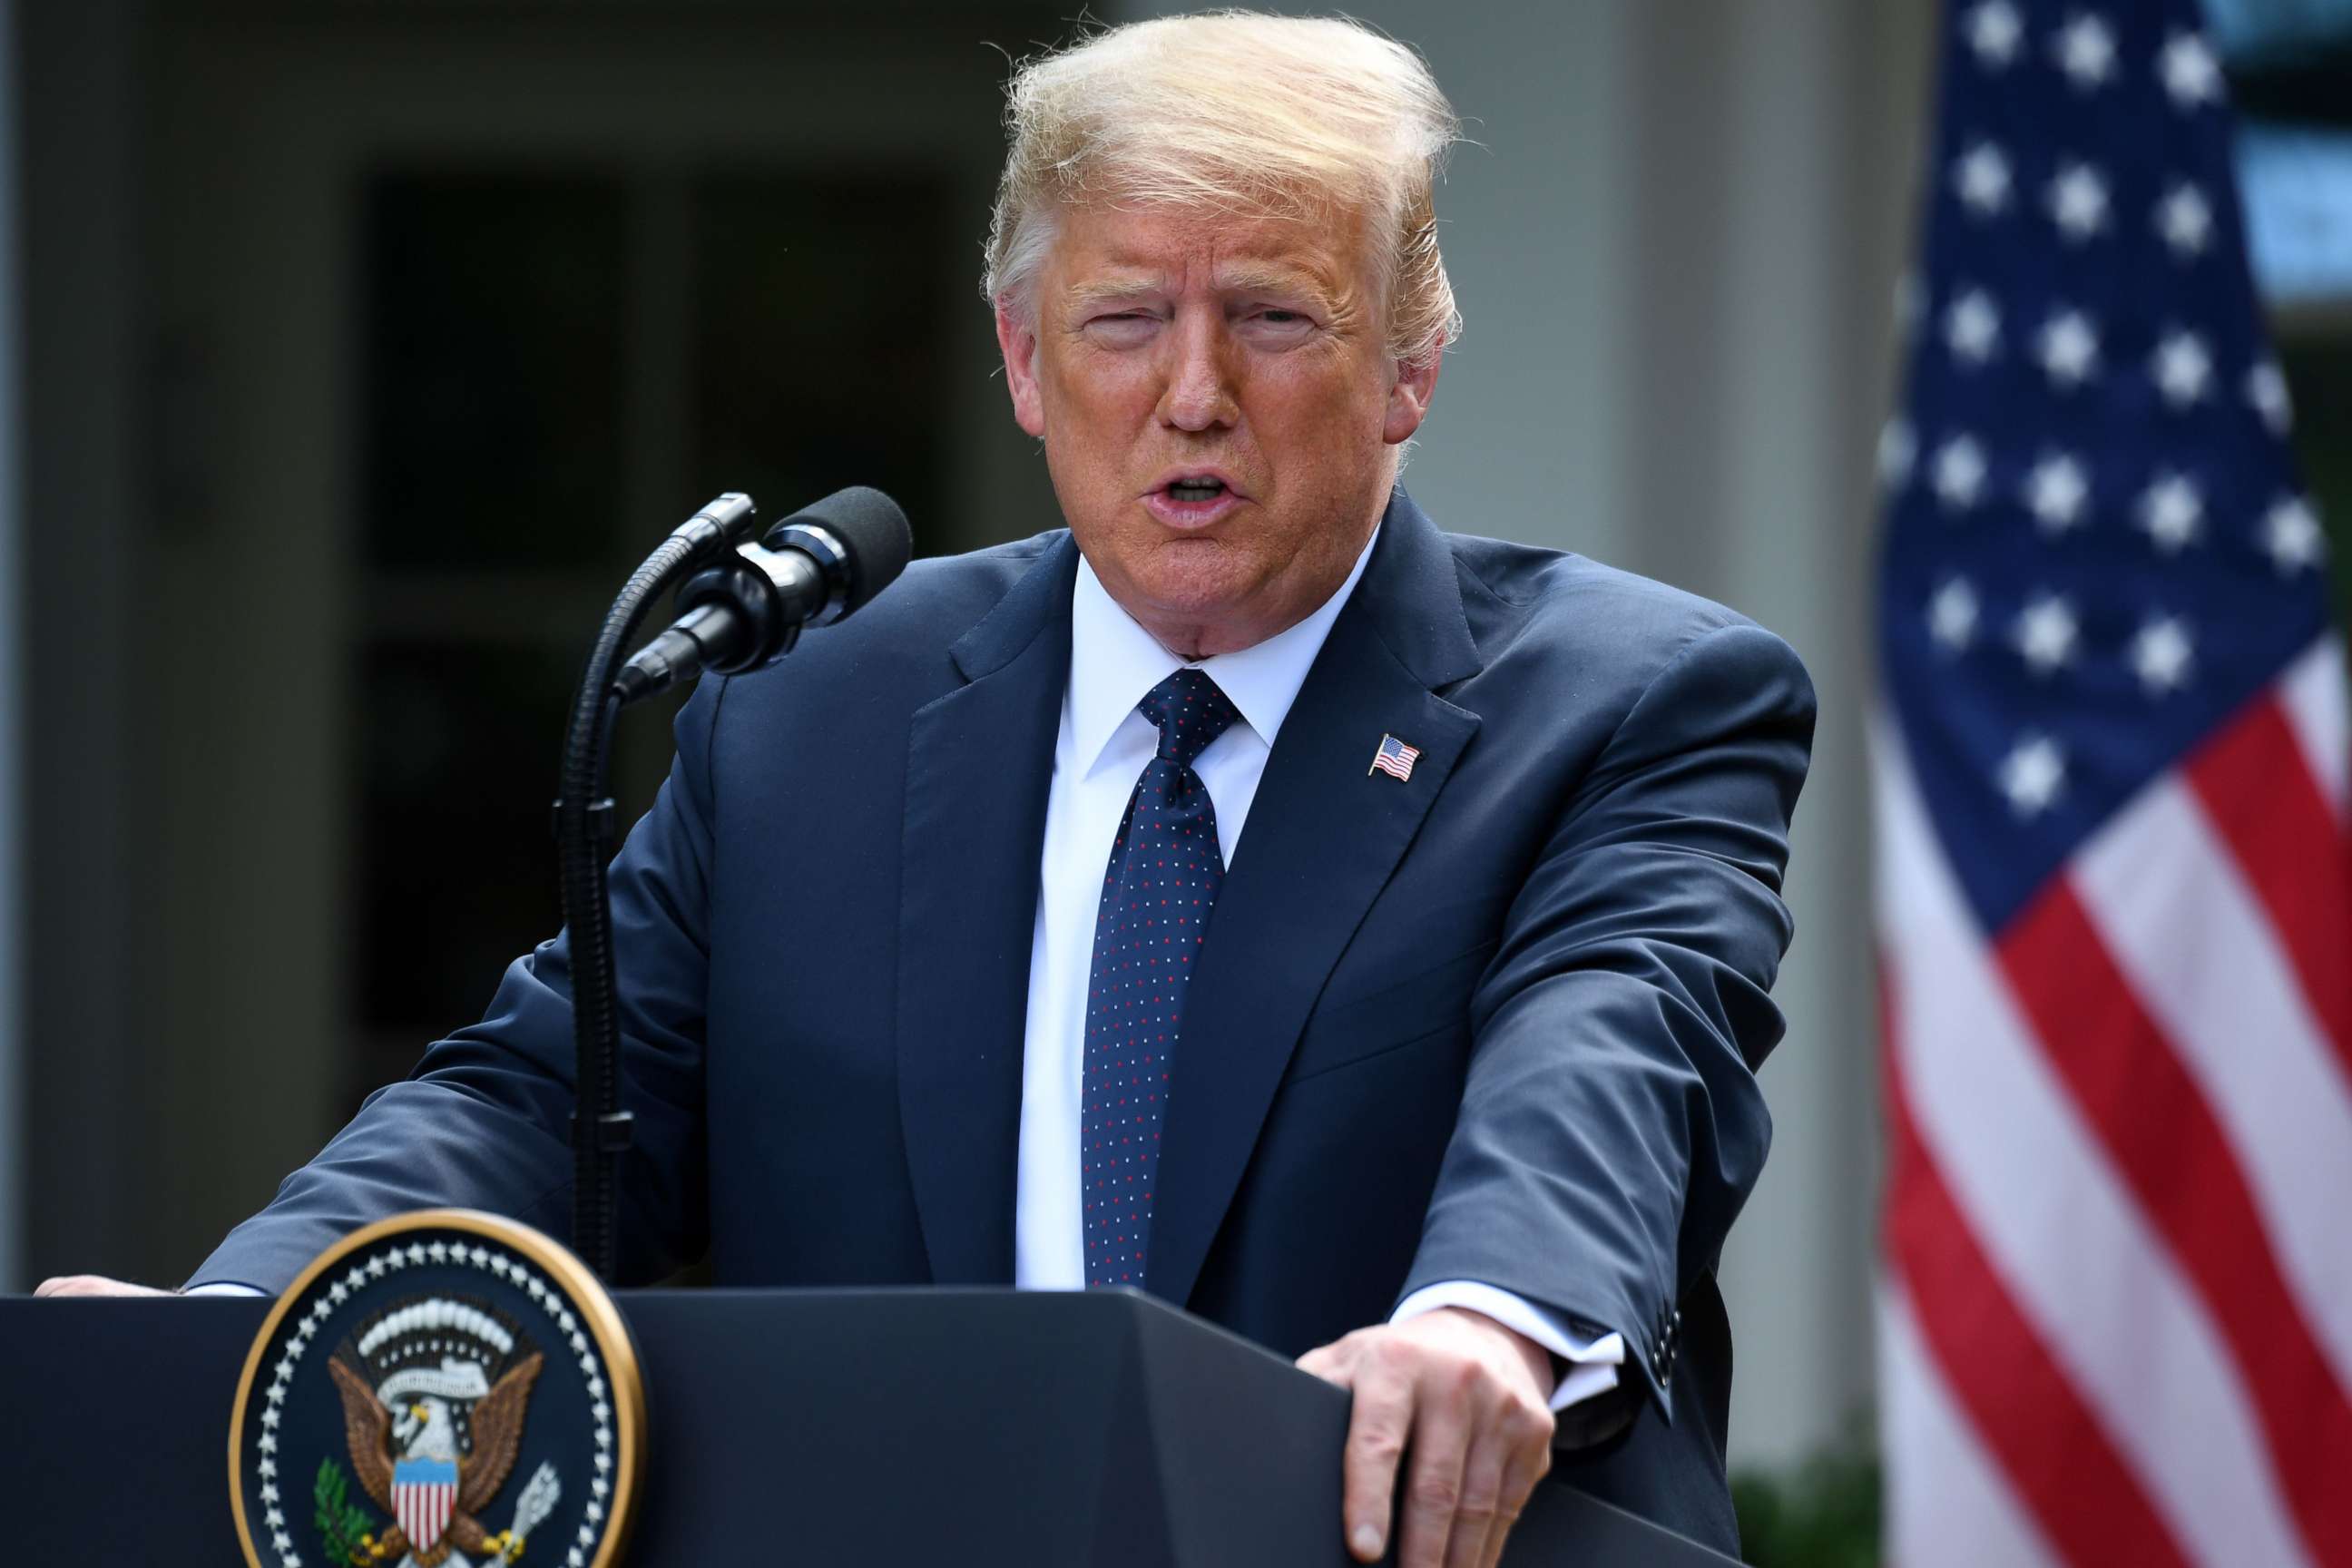 PHOTO: President Donald Trump speaks during a joint press conference with Polish President Andrzej Duda in the Rose Garden of the White House in Washington, June 24, 2020.